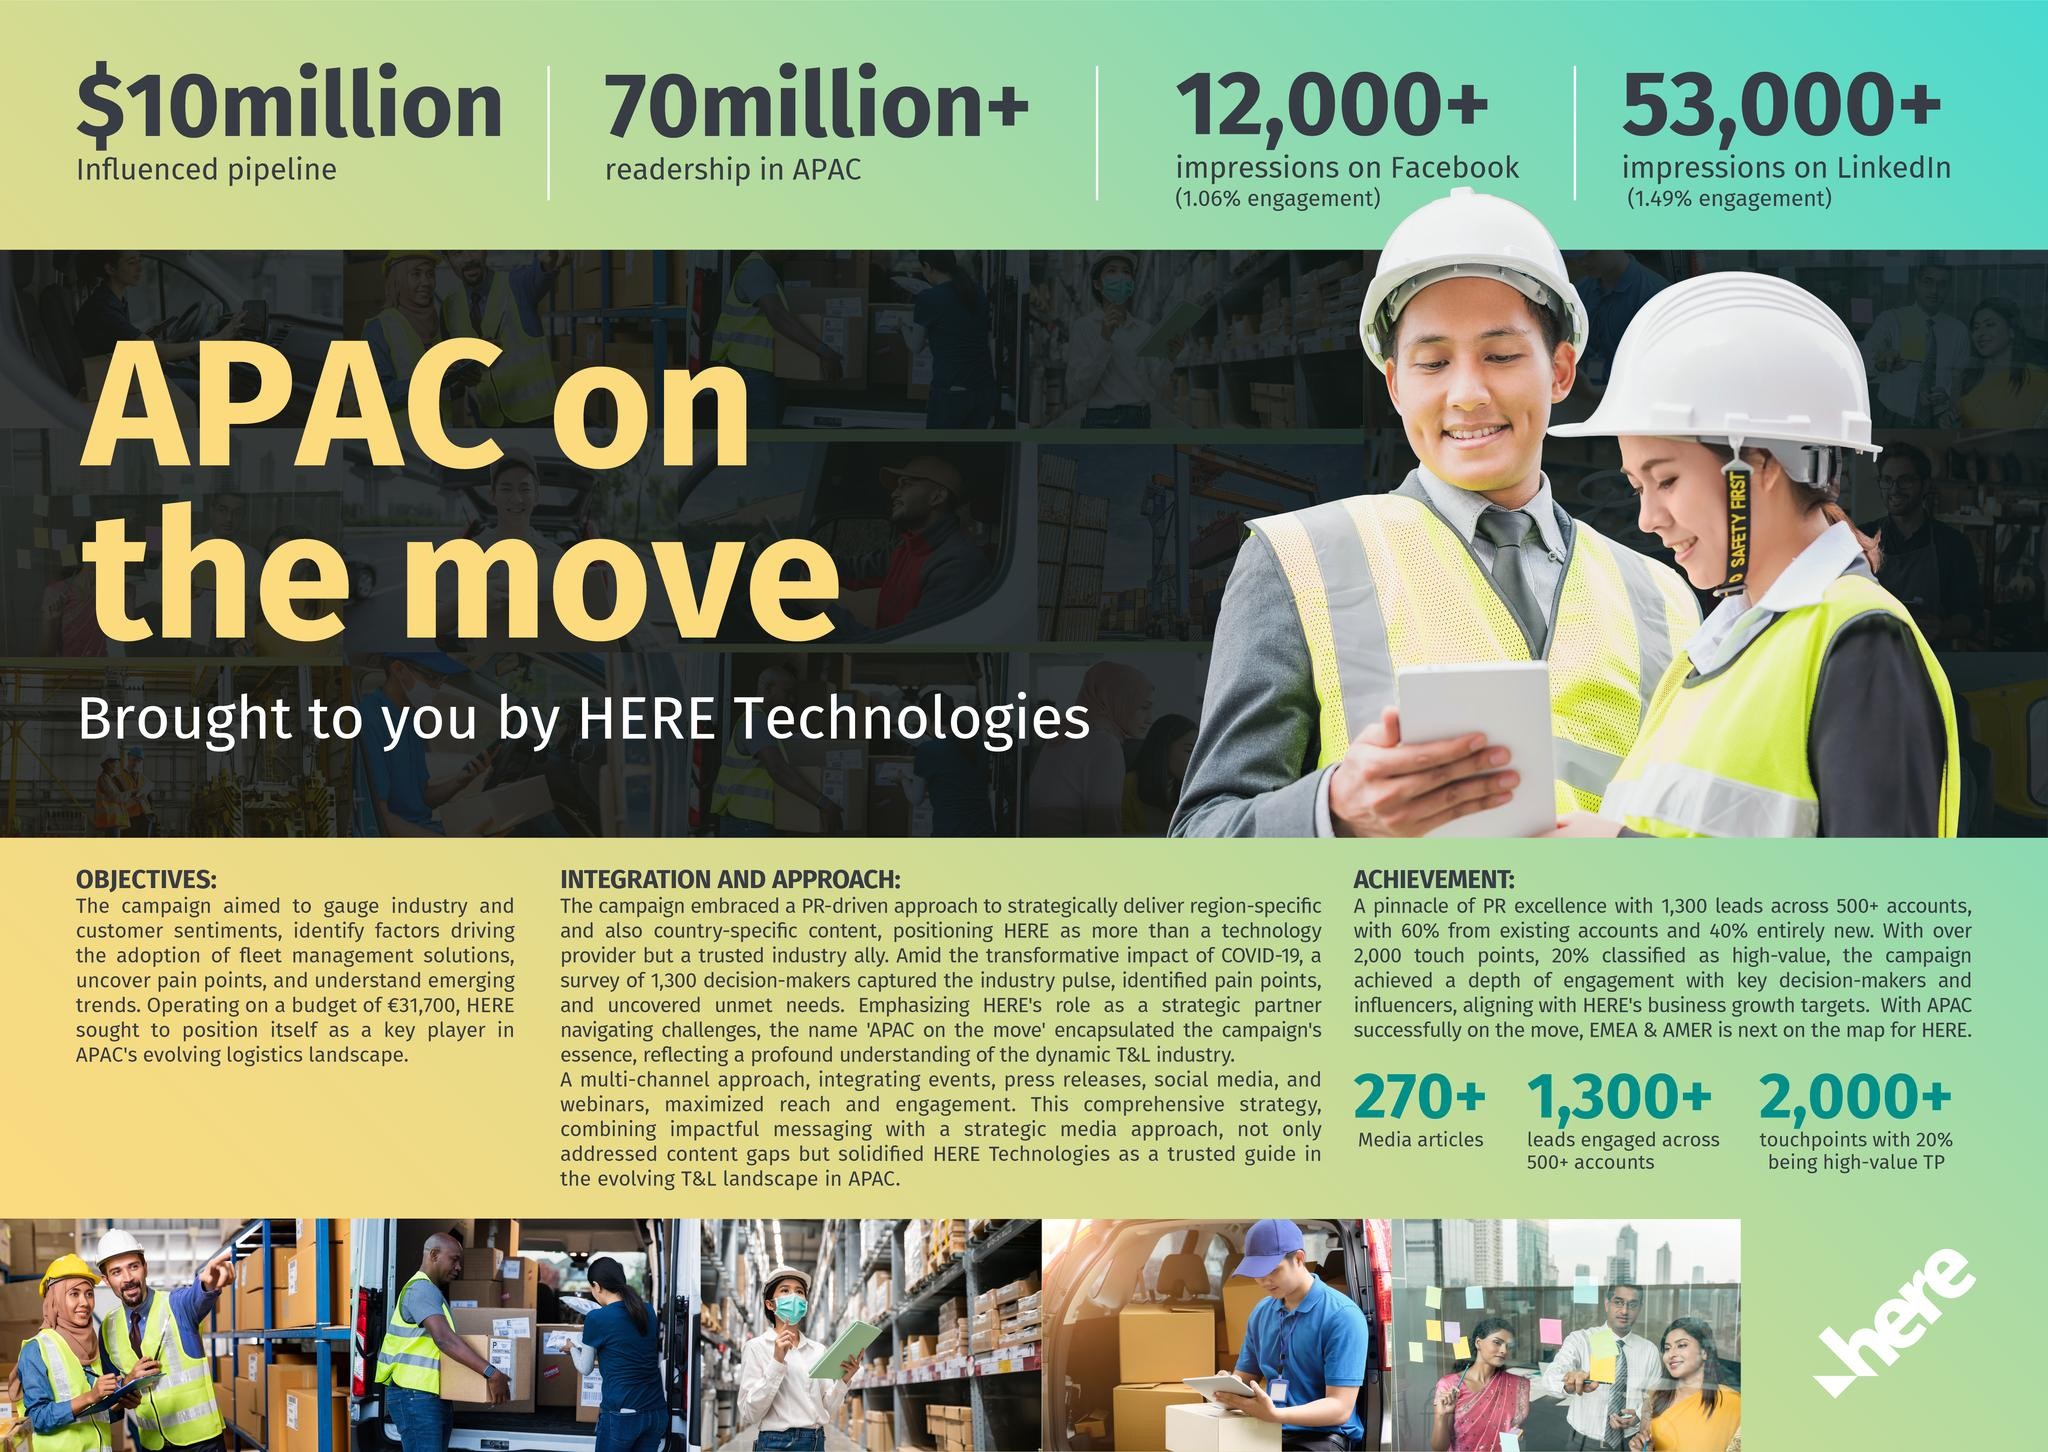 THE 'APAC ON THE MOVE' CAMPAIGN